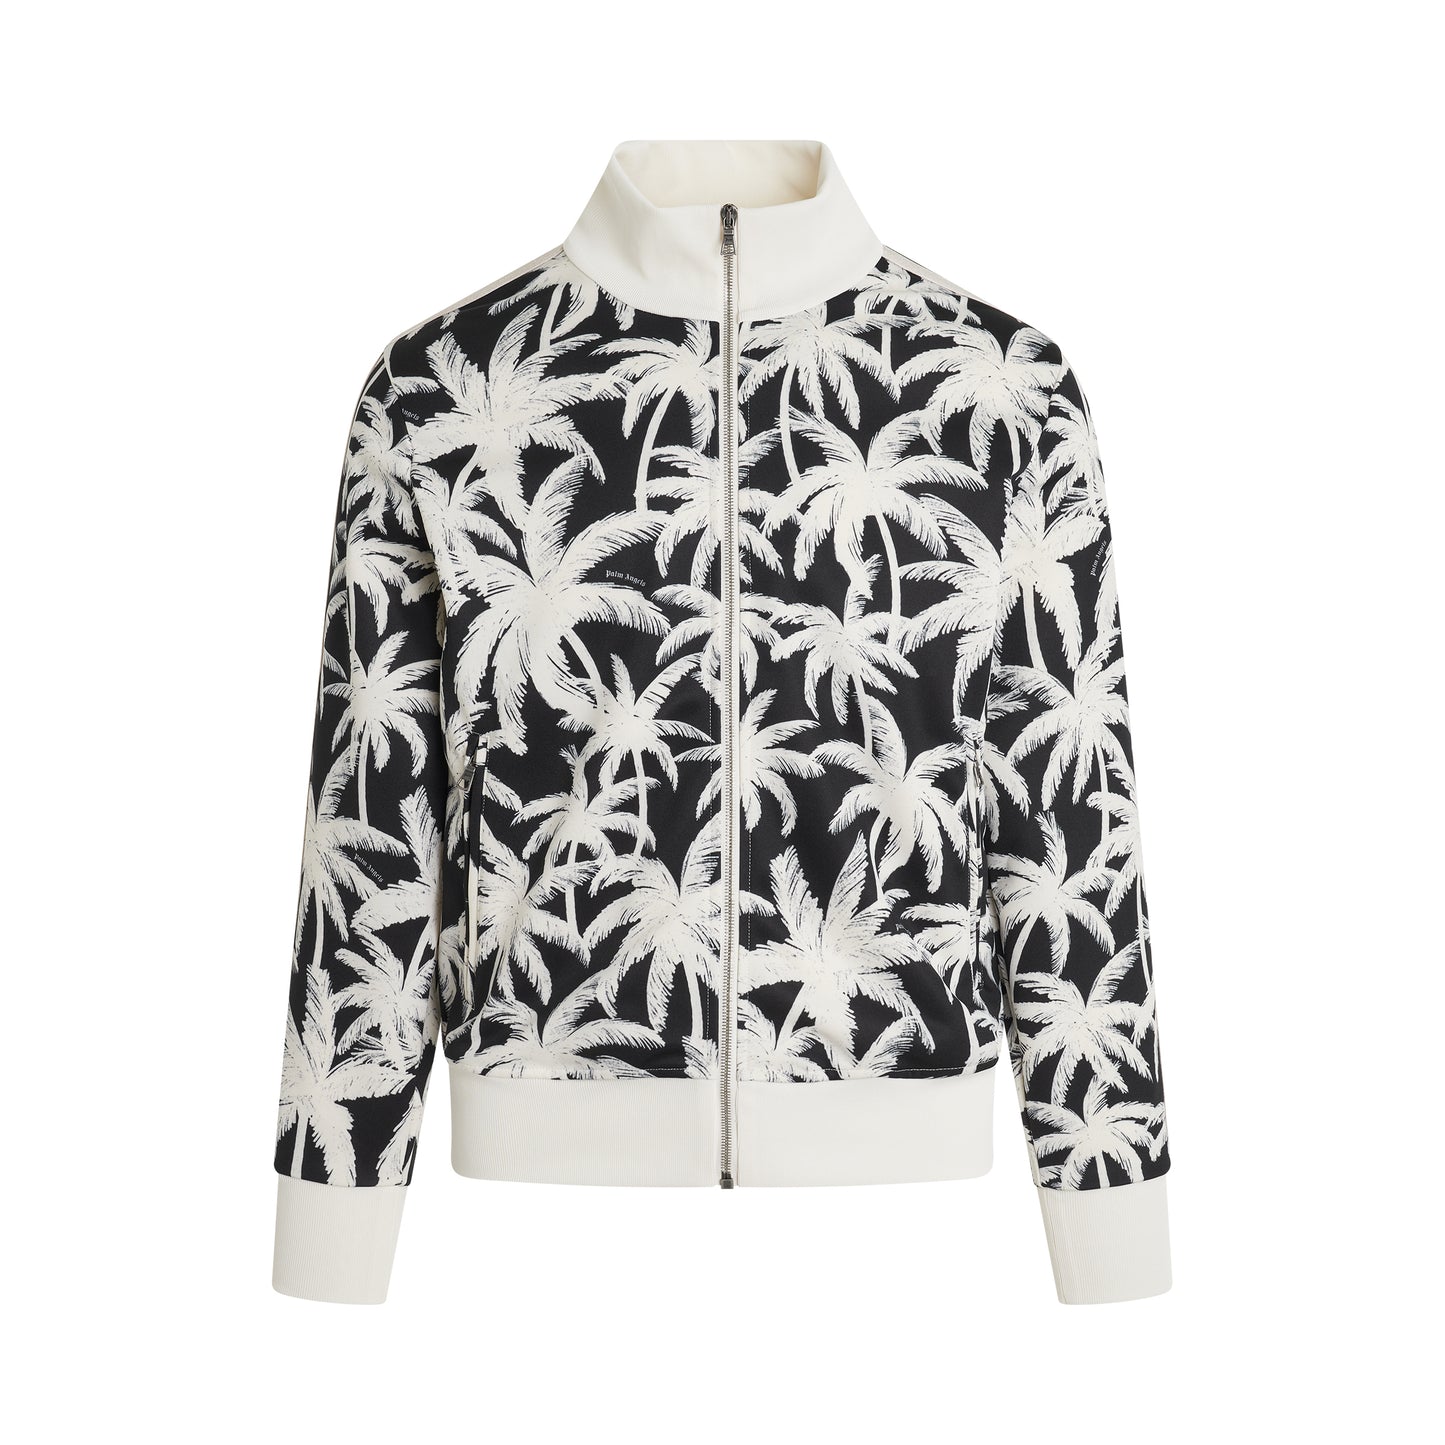 Palms All over Track Jacket in Black/Off White